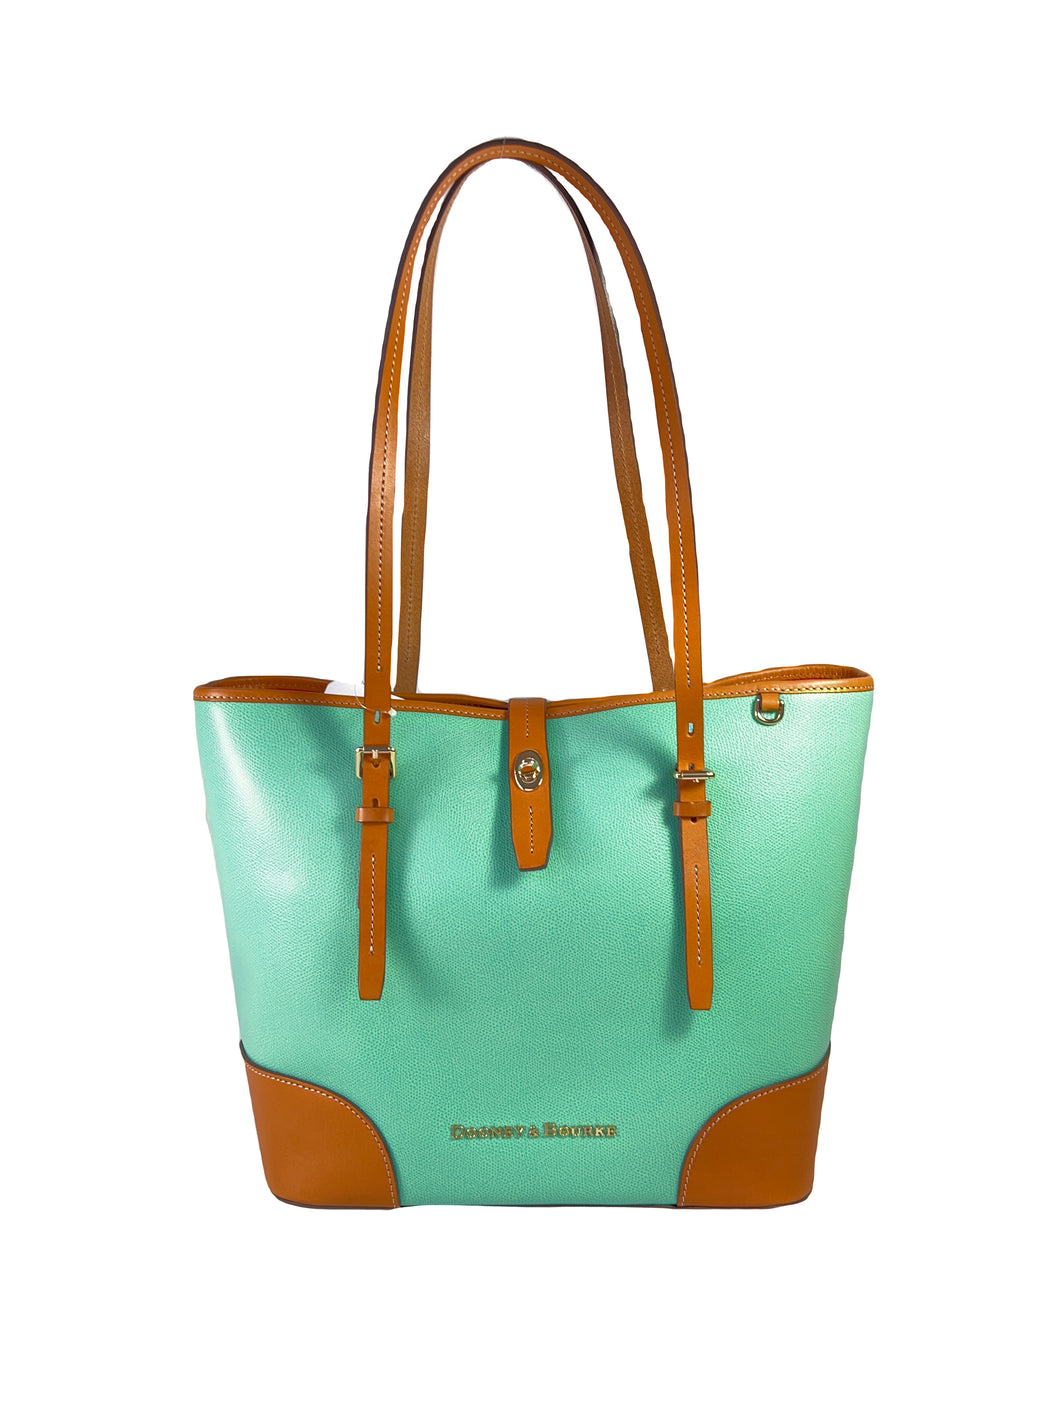 Dooney & Bourke green and brown leather tote NWT